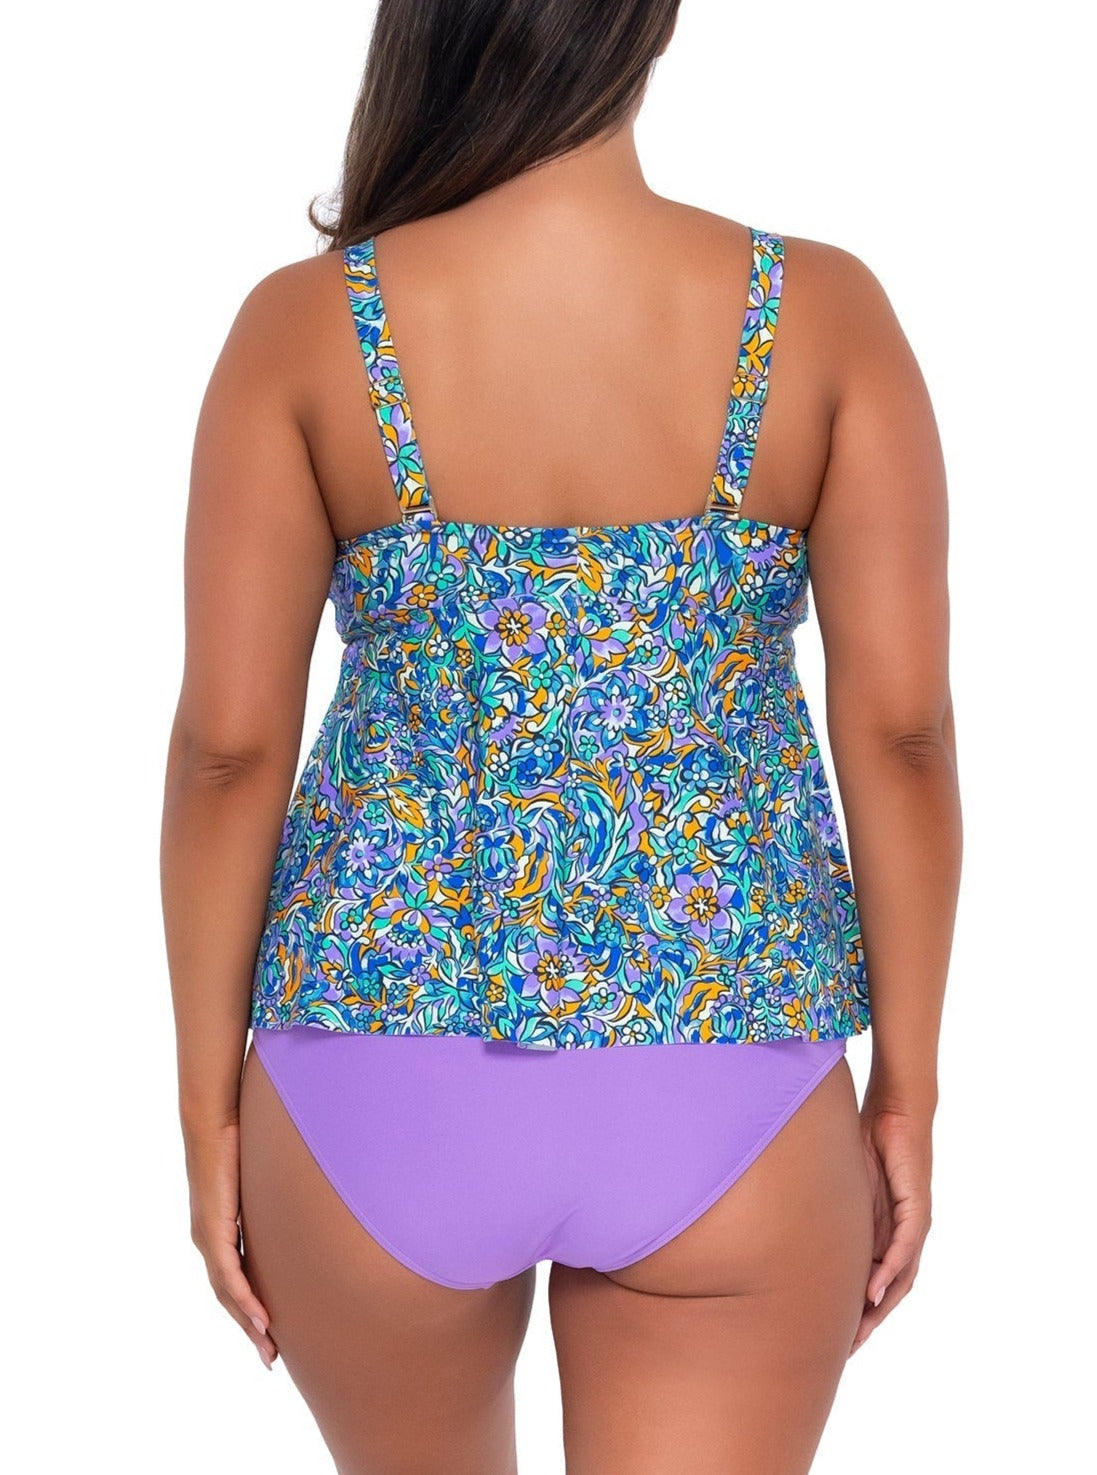 Sunsets Escape "Brands,Swimwear" 6 / PANSY / 970T Sunsets Escape Pansy Fields Marin Tankini Top